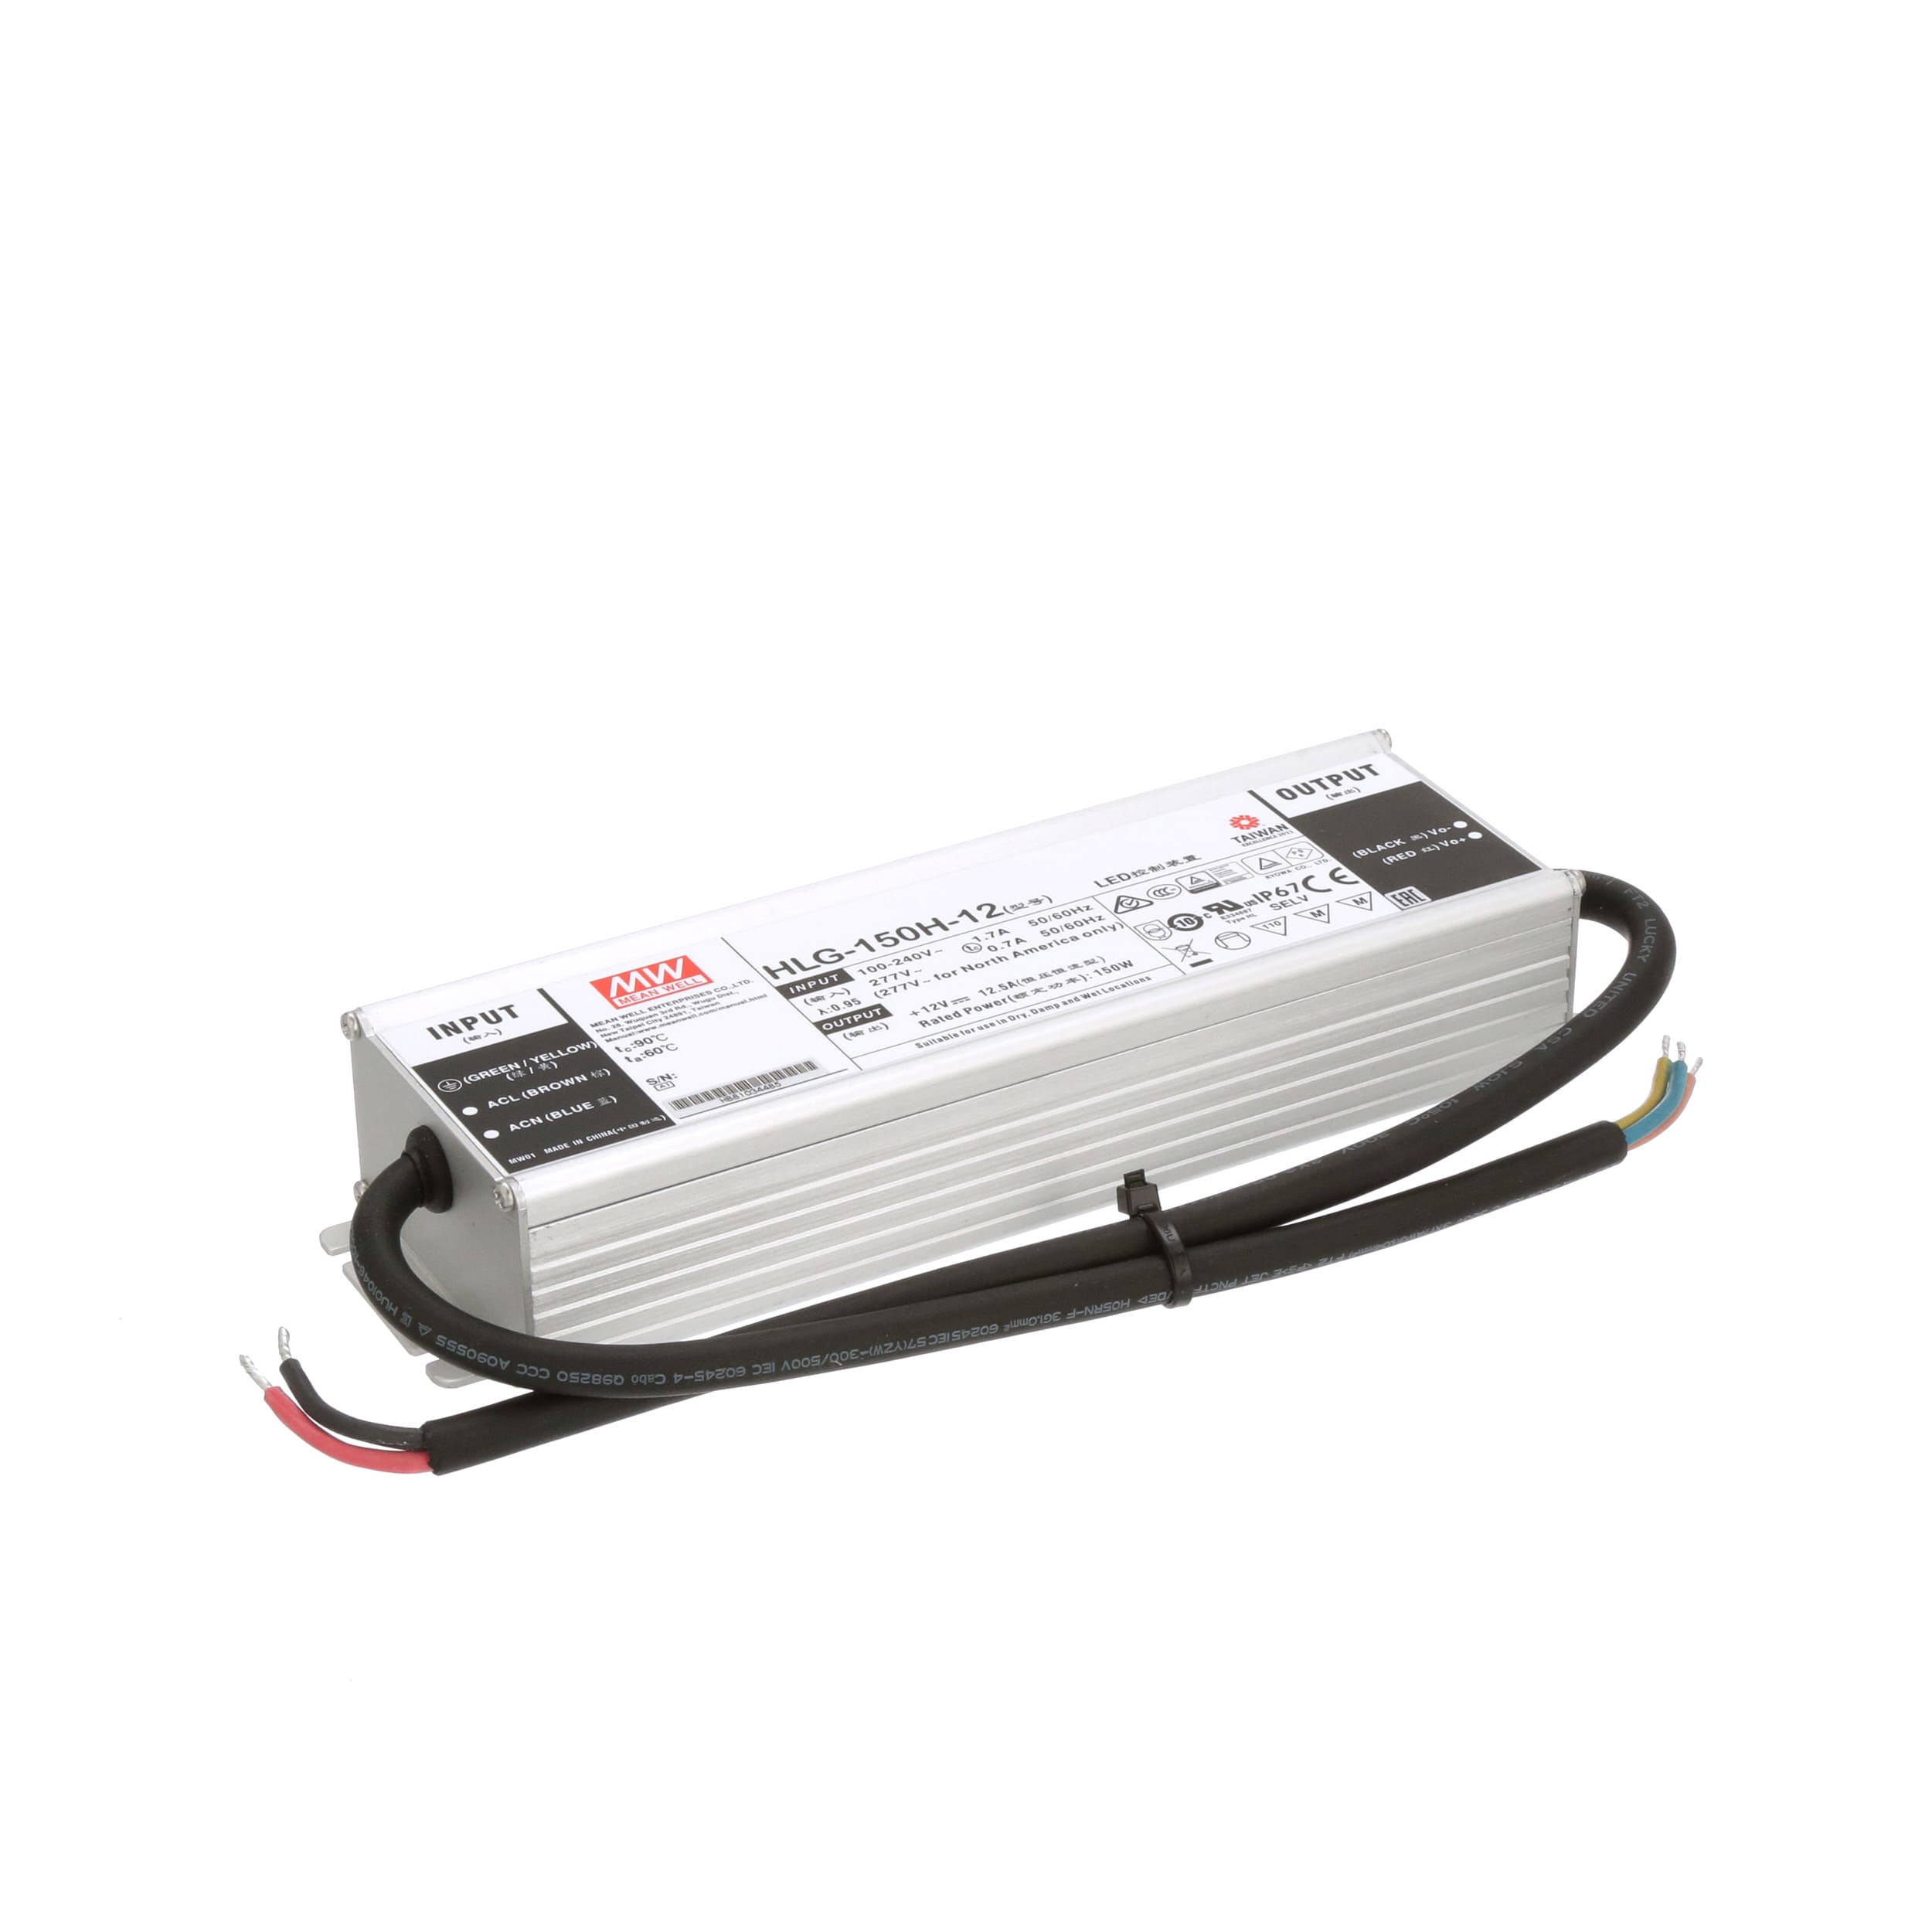 High Efficiency with PFC NEW Mean Well HLG-150H-12 LED Series Power Supply 